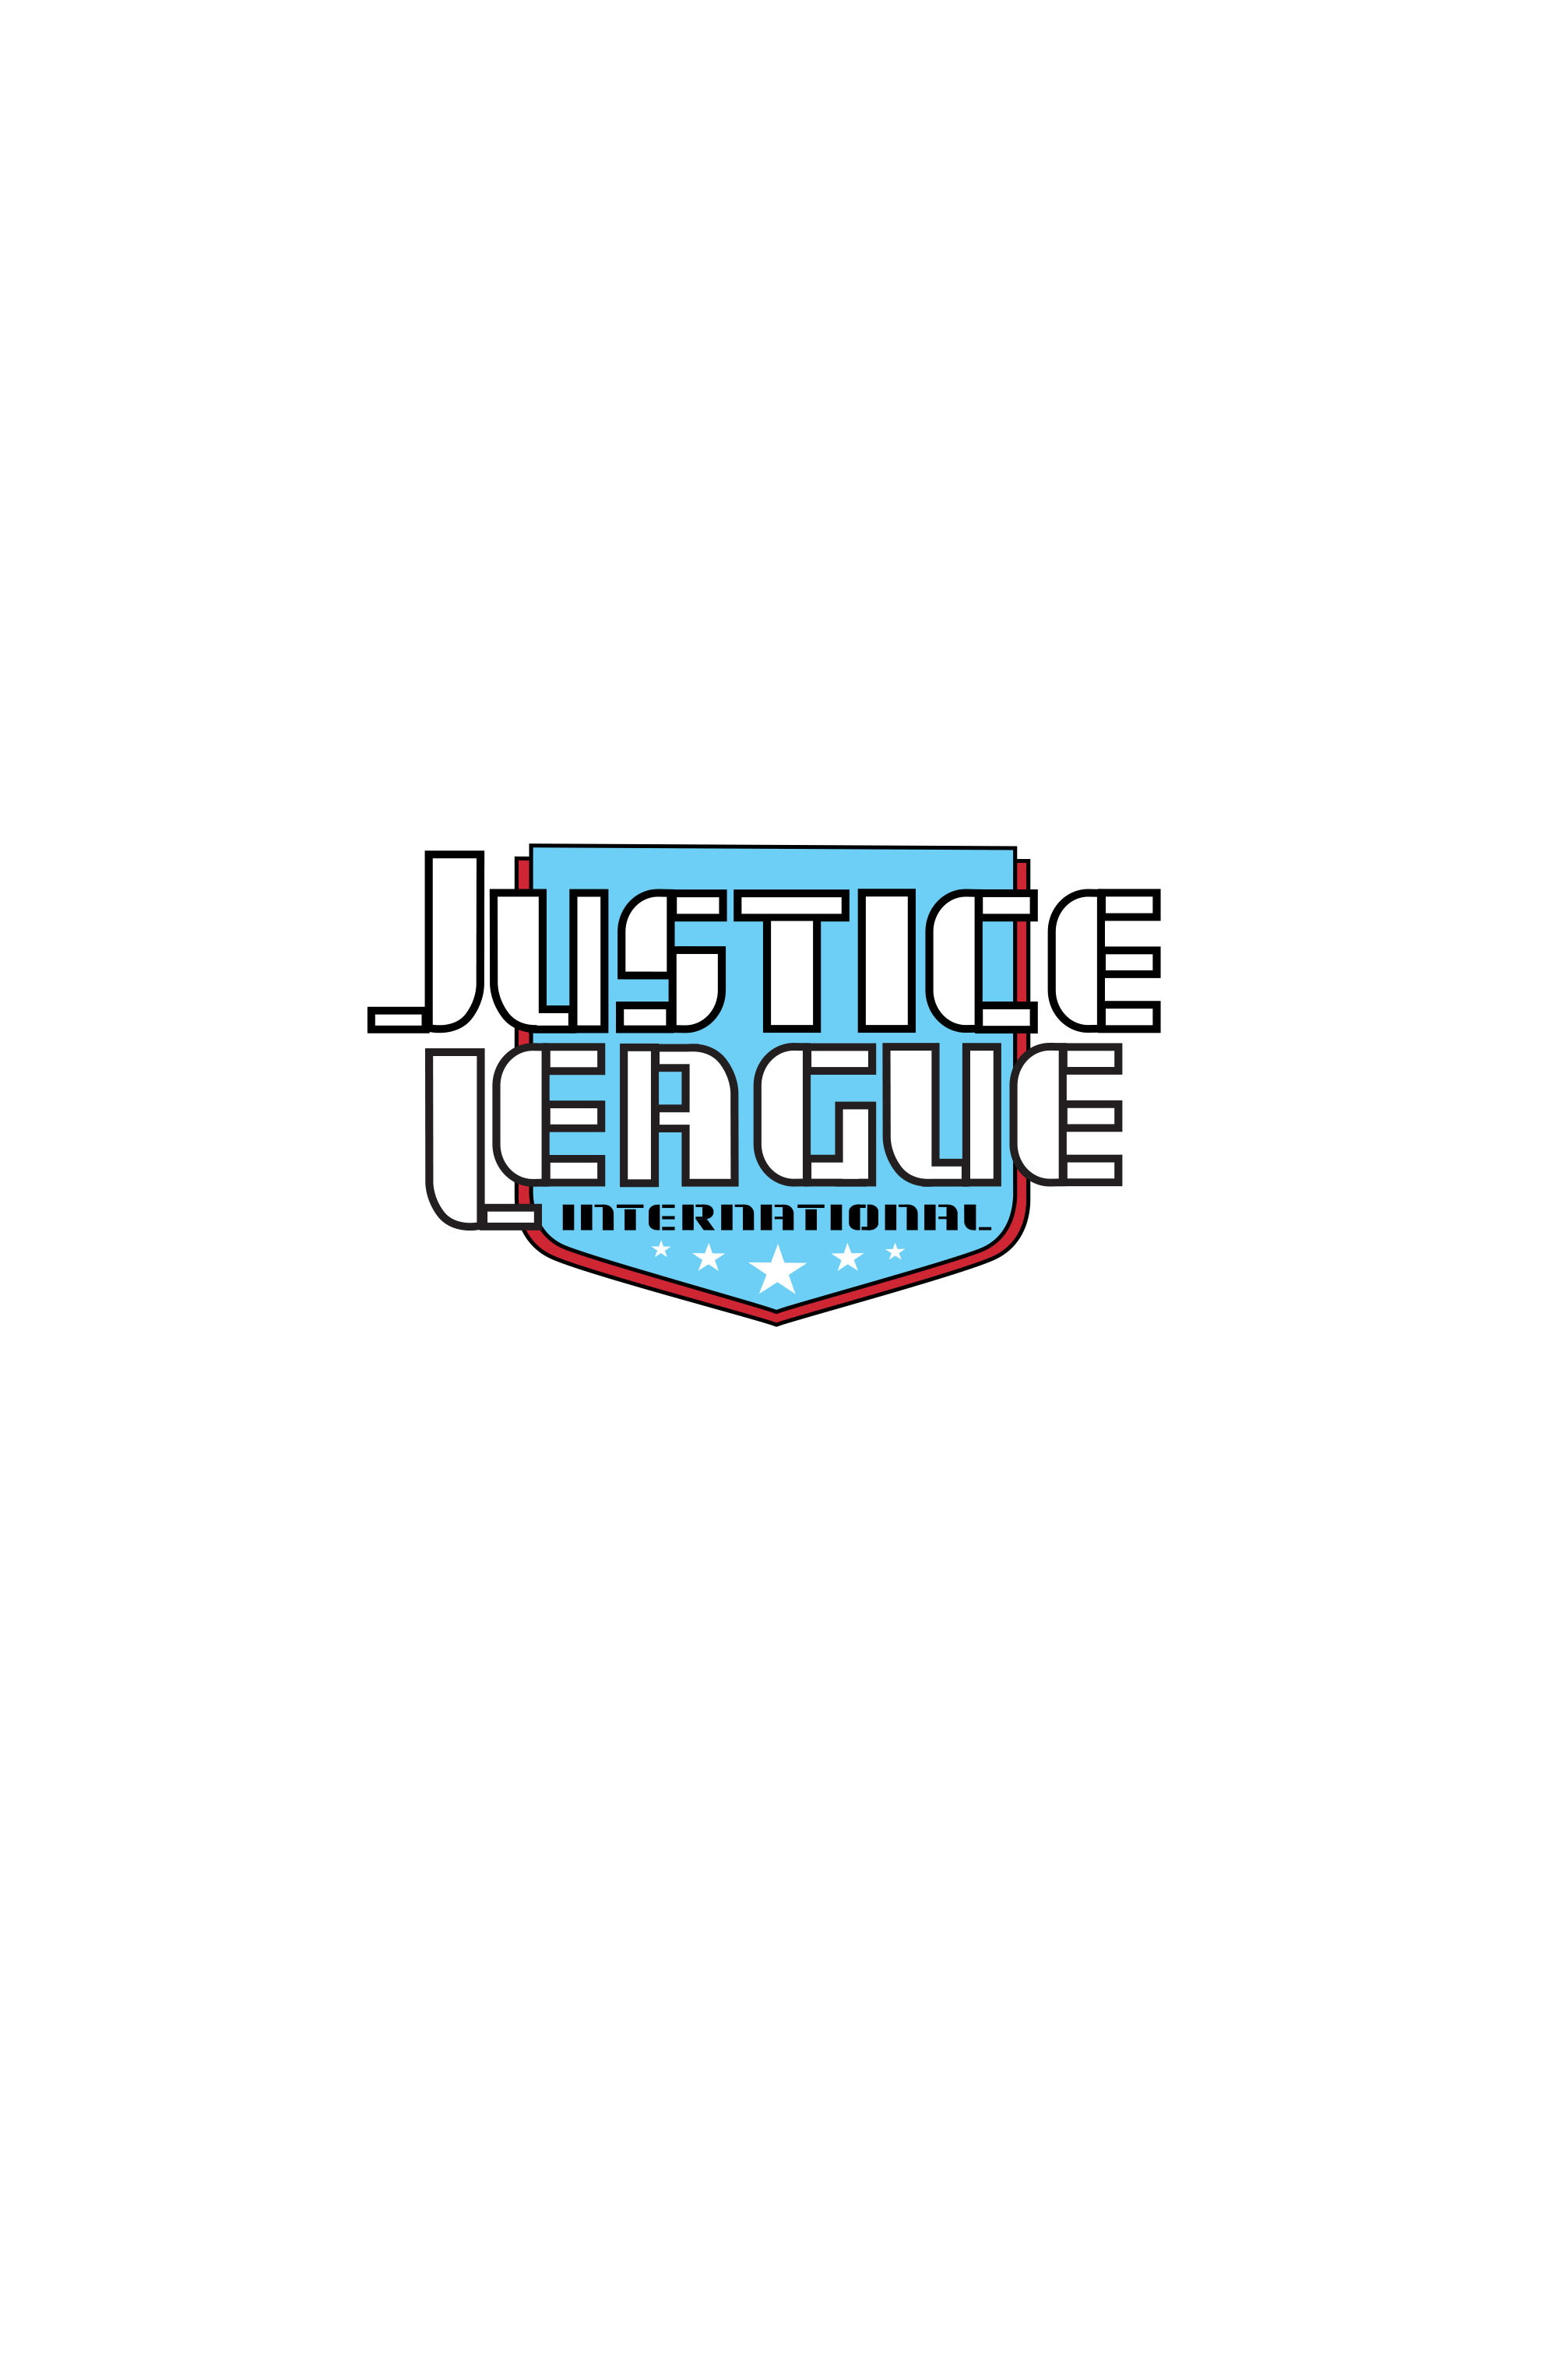 Read online Justice League International (2008) comic -  Issue # TPB 4 - 2